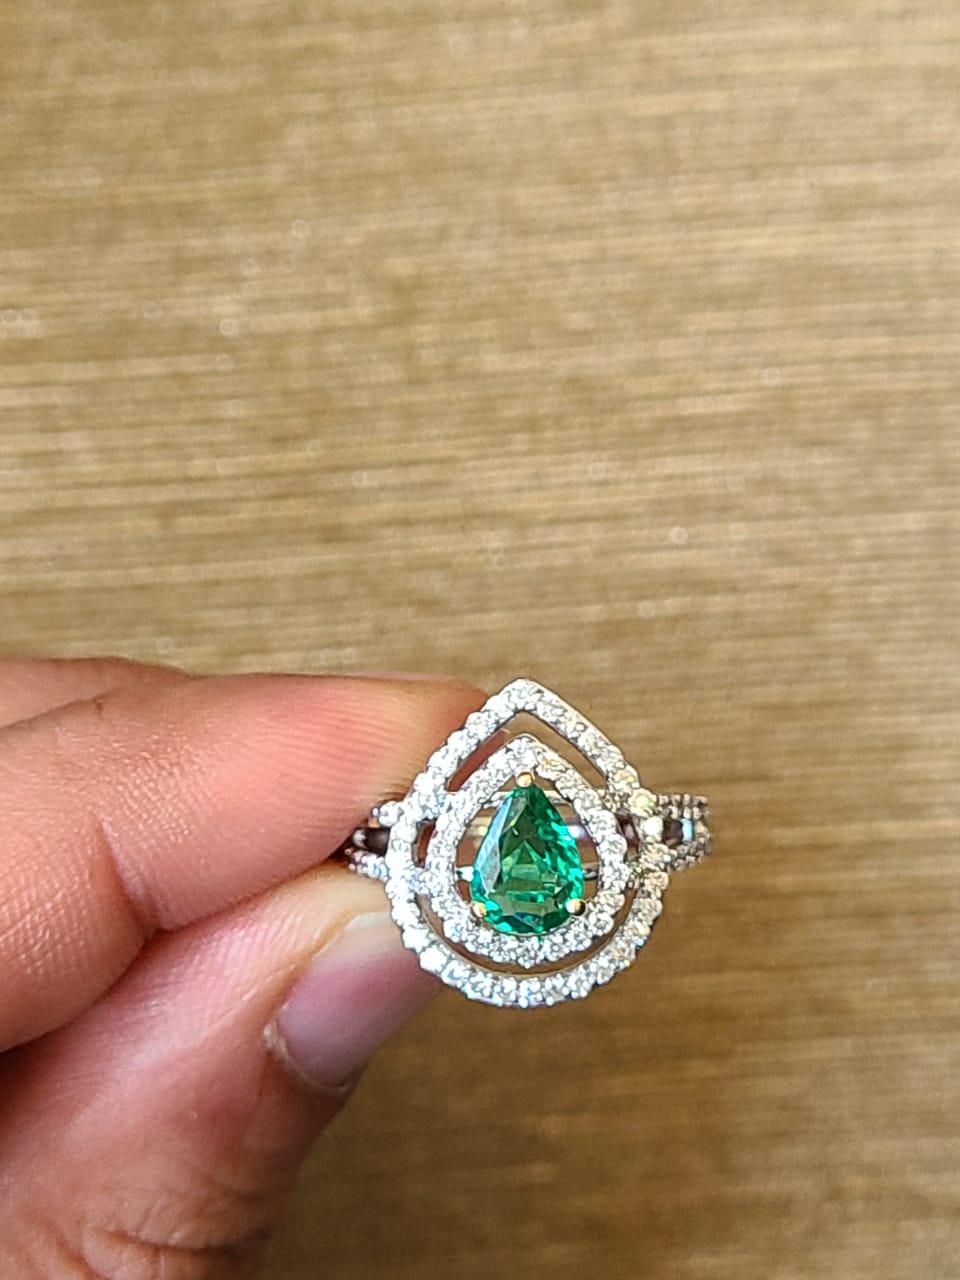 Set in 18K White Gold, Zambian Emerald & Diamonds Cocktail/ Engagement Ring 1